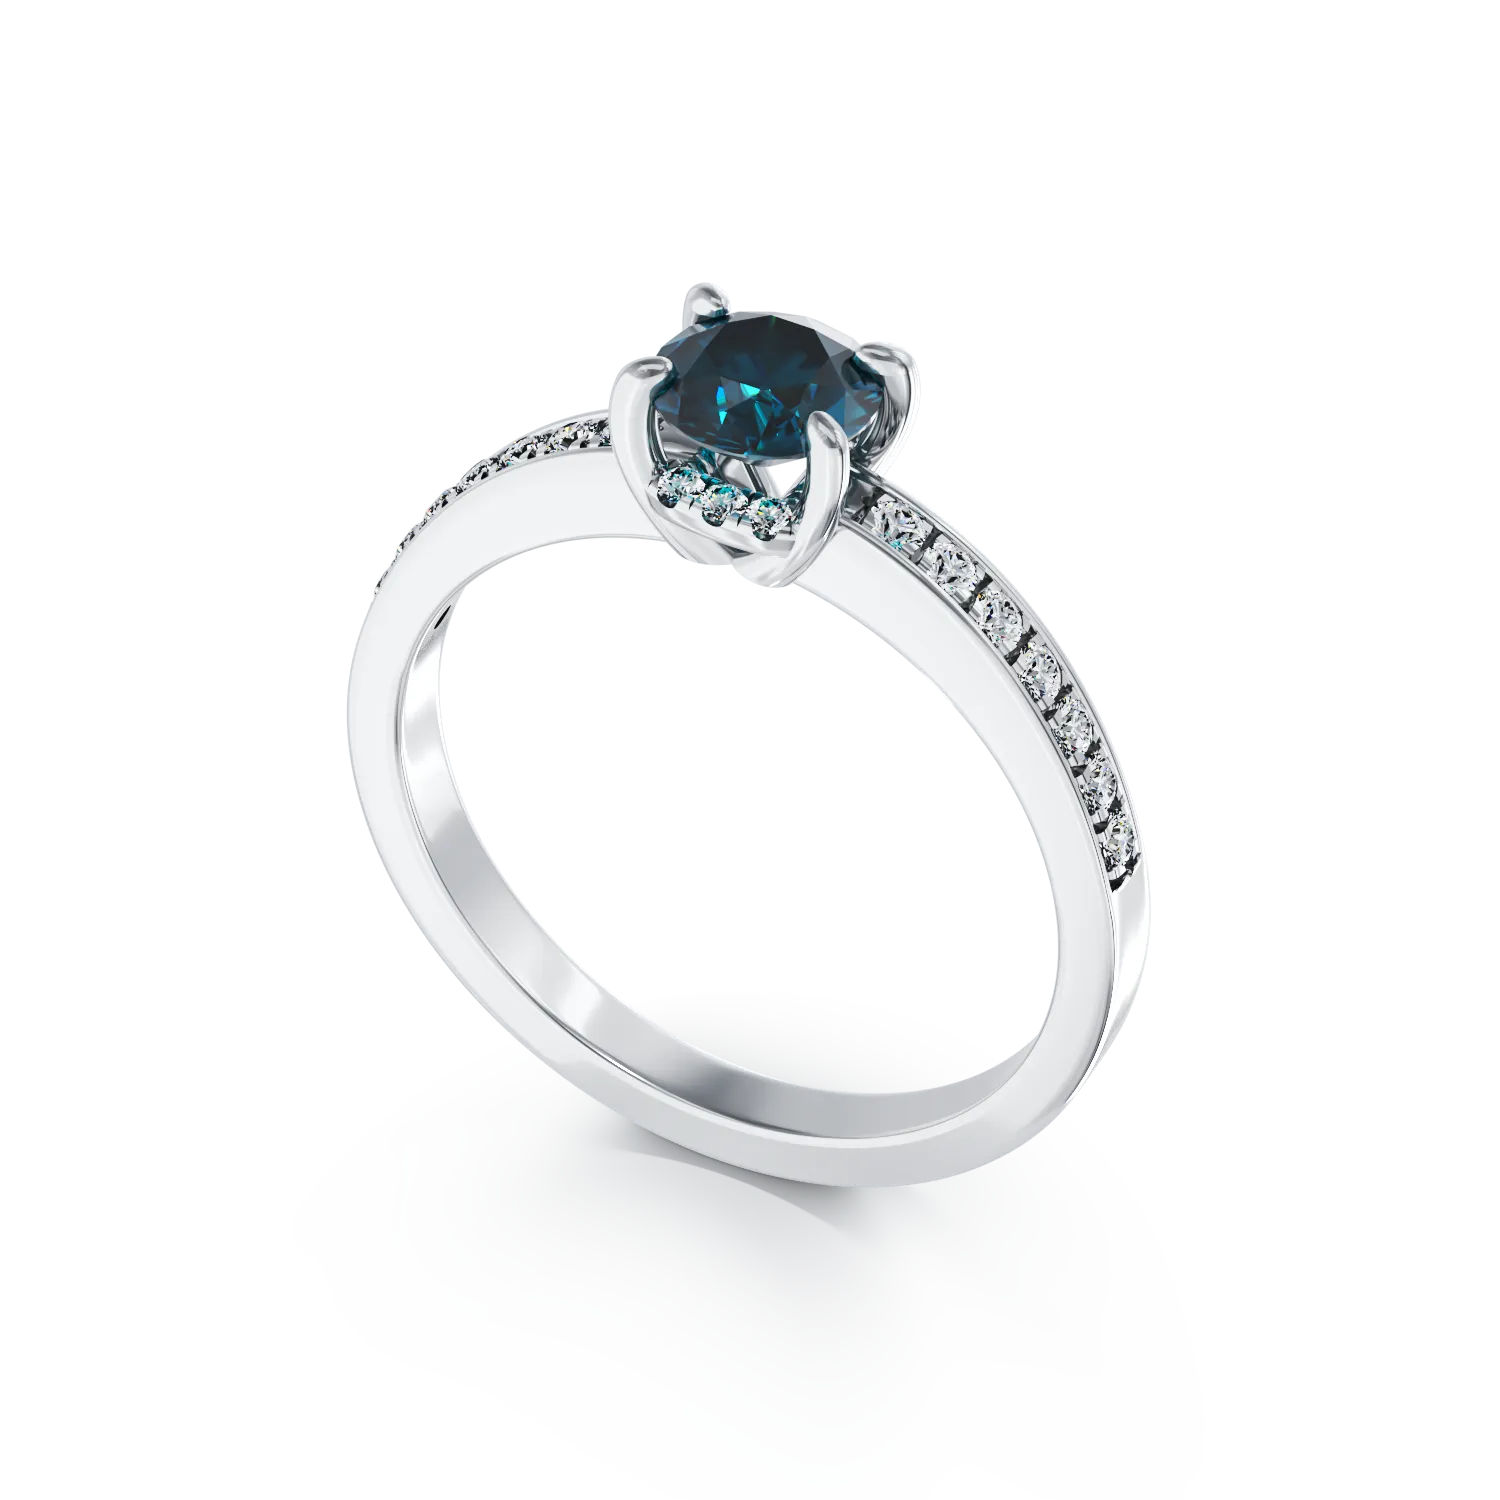 18K white gold engagement ring with blue diamond of 0.55ct and diamonds of 0.27ct